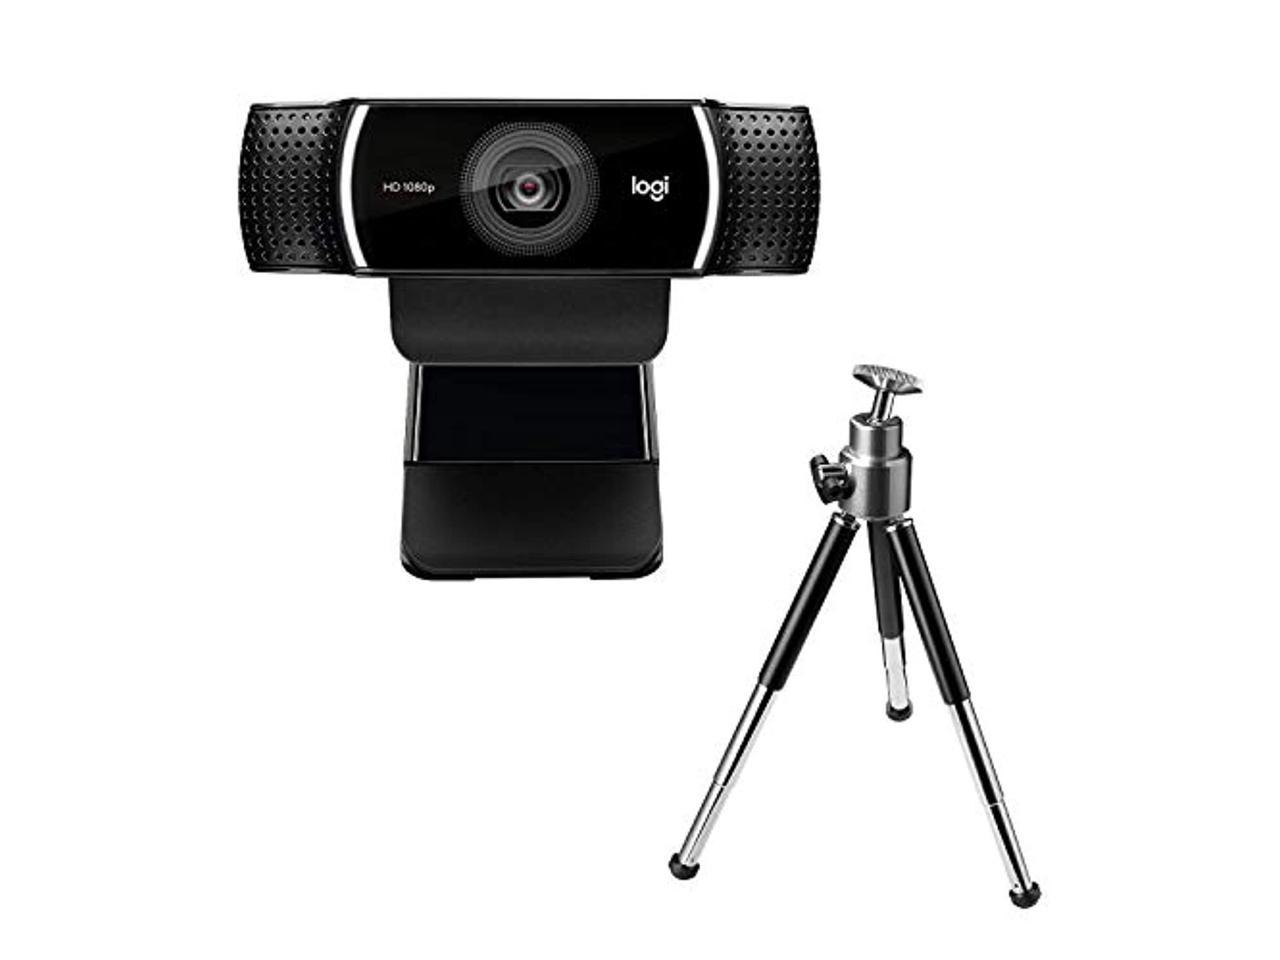 Logitech Pro Stream Webcam 1080P for HD Video Streaming & Recording 720P at 60Fps with Tripod Included Newegg.com